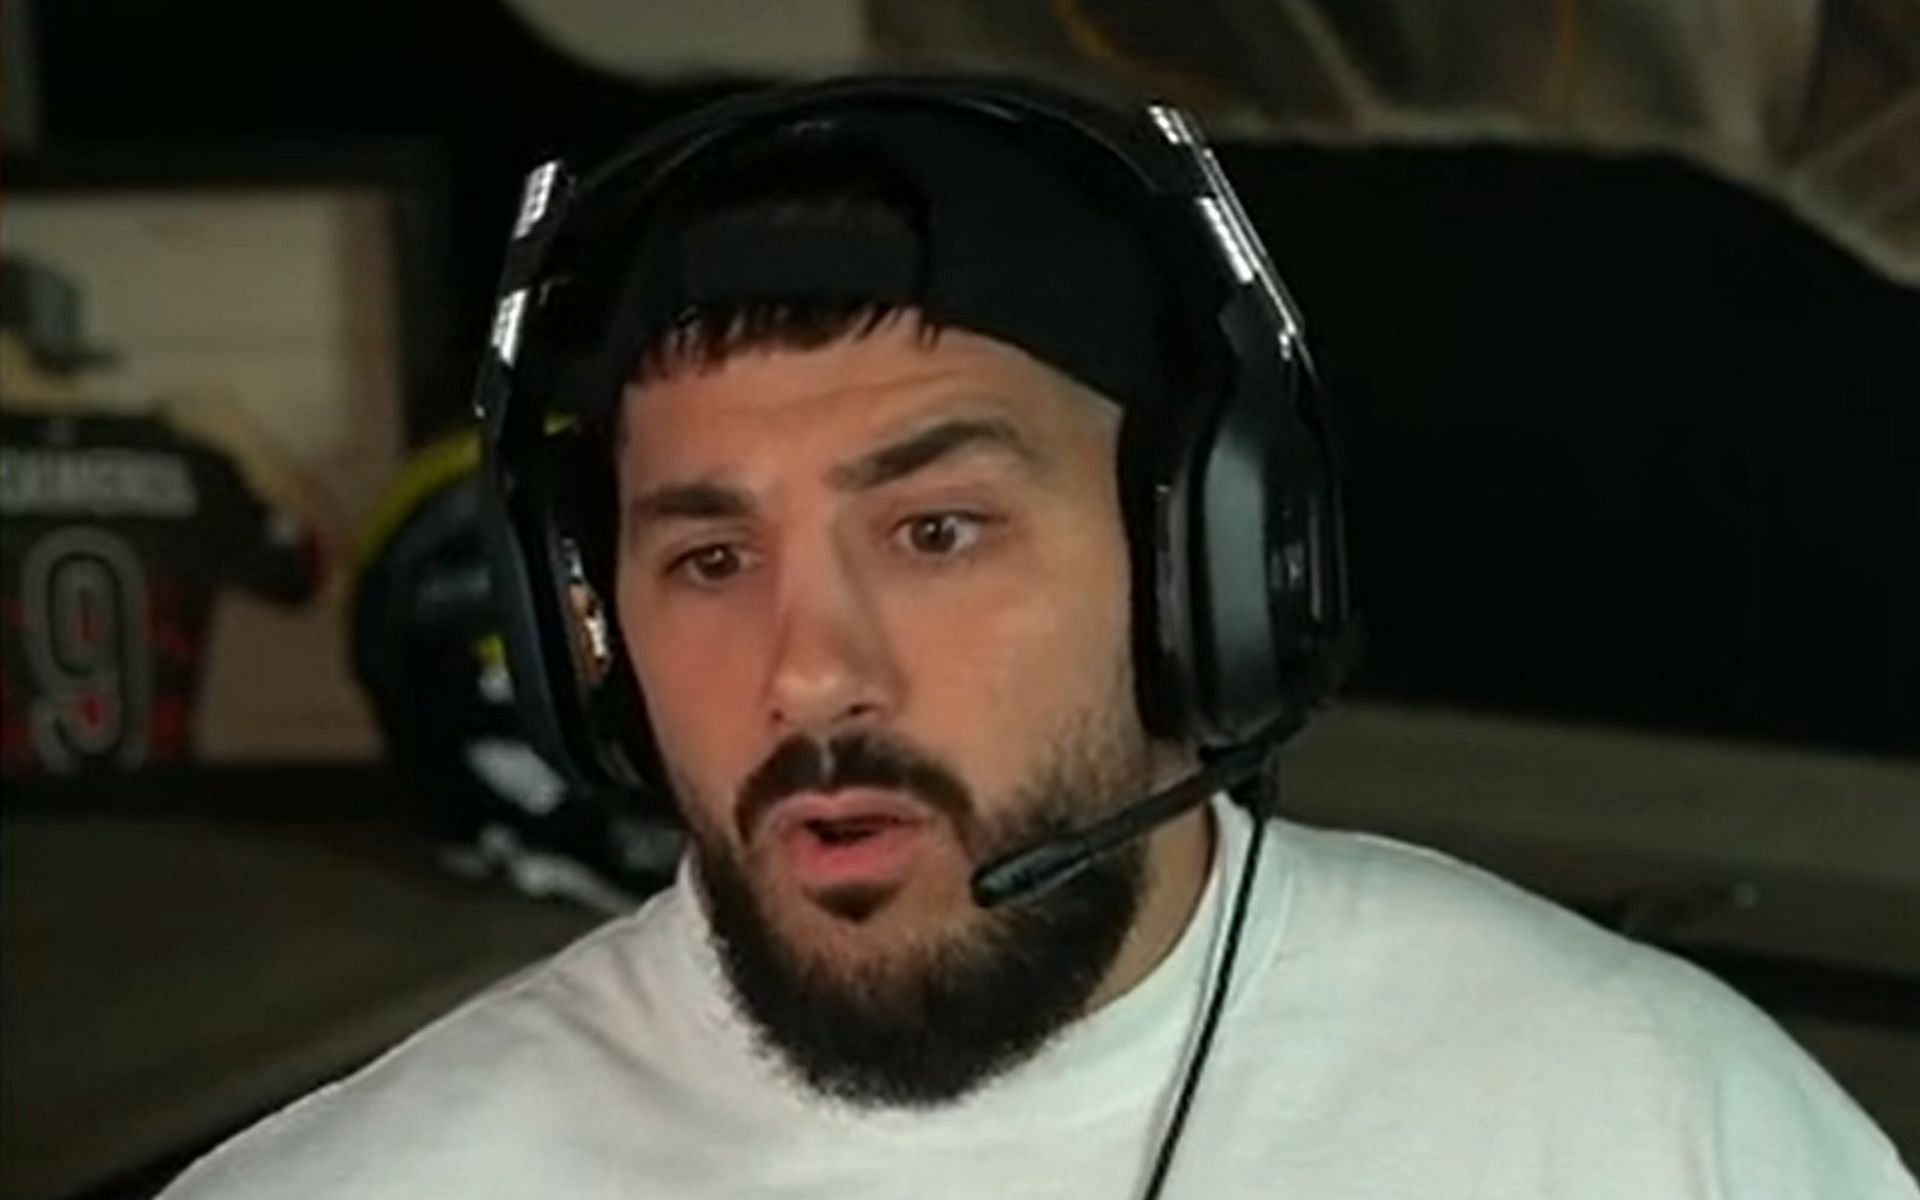 What did Nickmercs say about trans people?